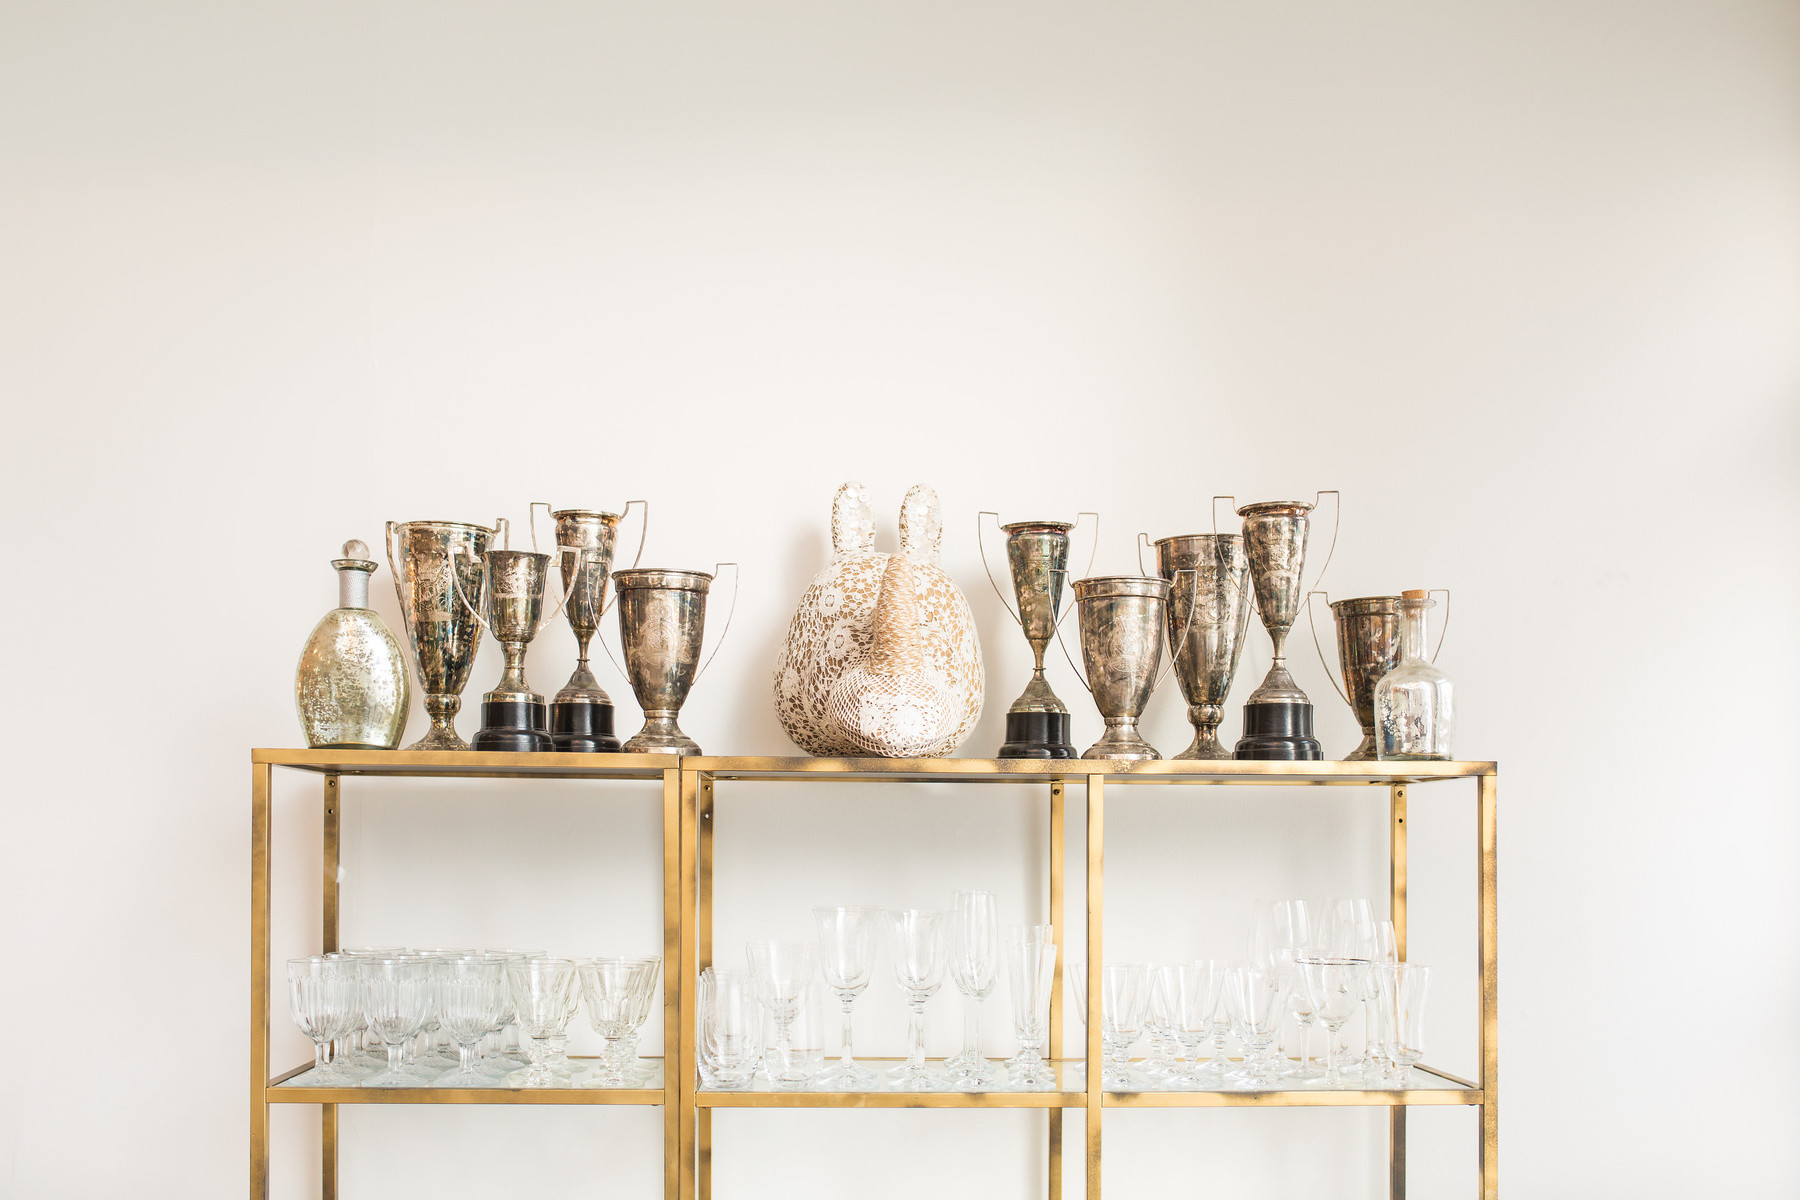 27 Elegant Debi Lilly Vases for Sale 2022 free download debi lilly vases for sale of alissa pagels photographer alissa pagels editorial lifestyle with you can find the full feature and more in the current issue of the source